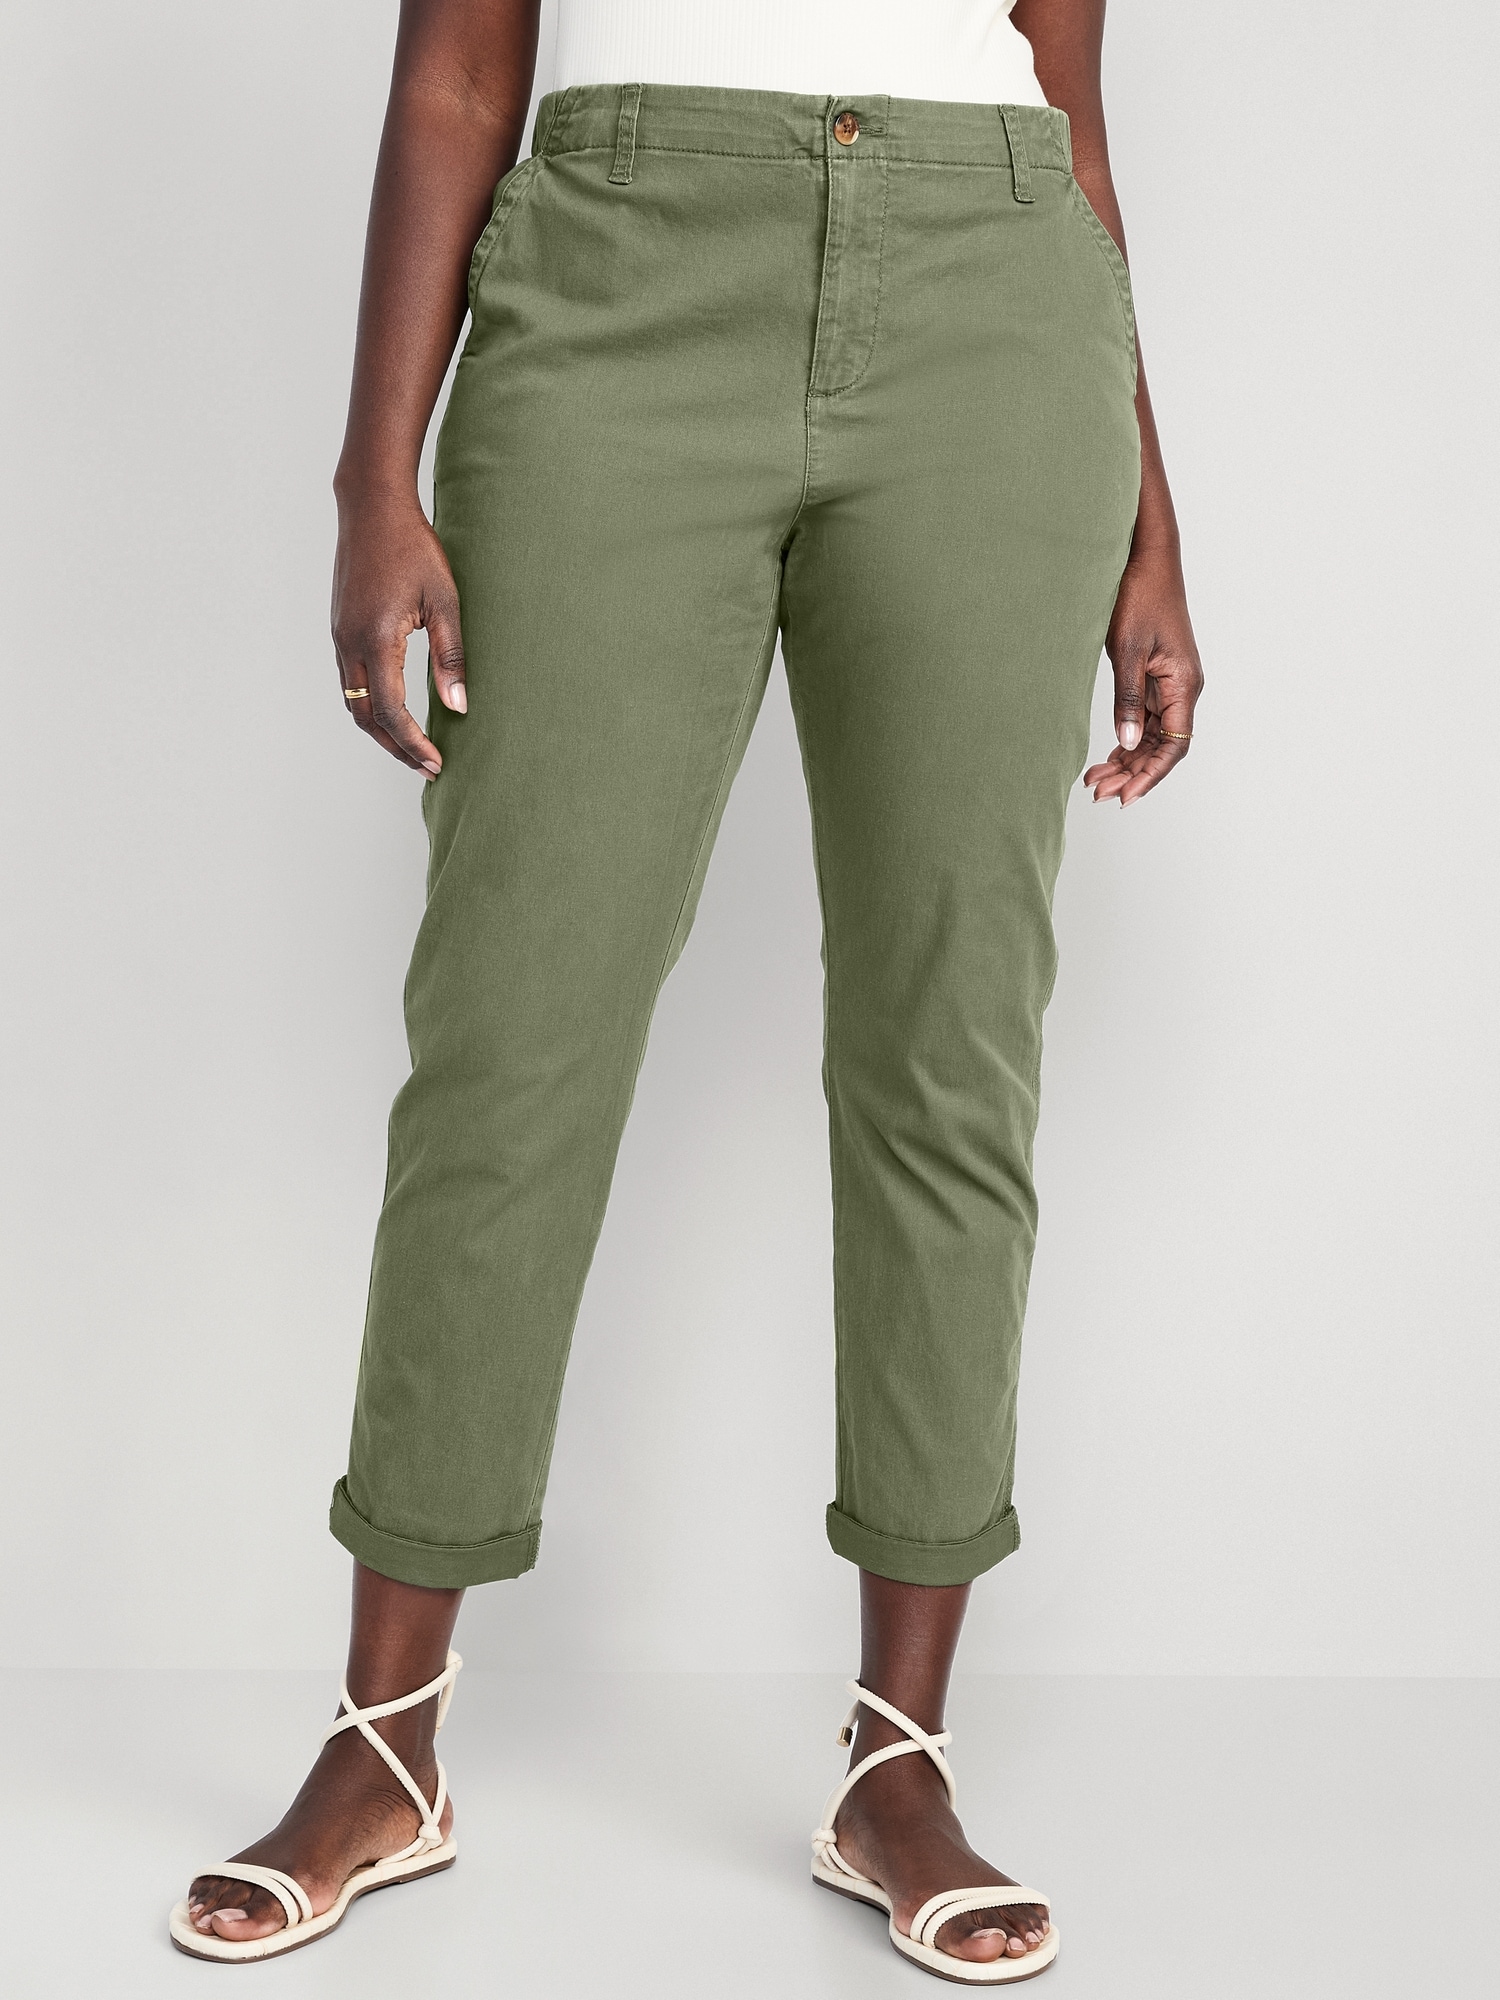 High-Waisted OGC Chino Pants for Women | Old Navy